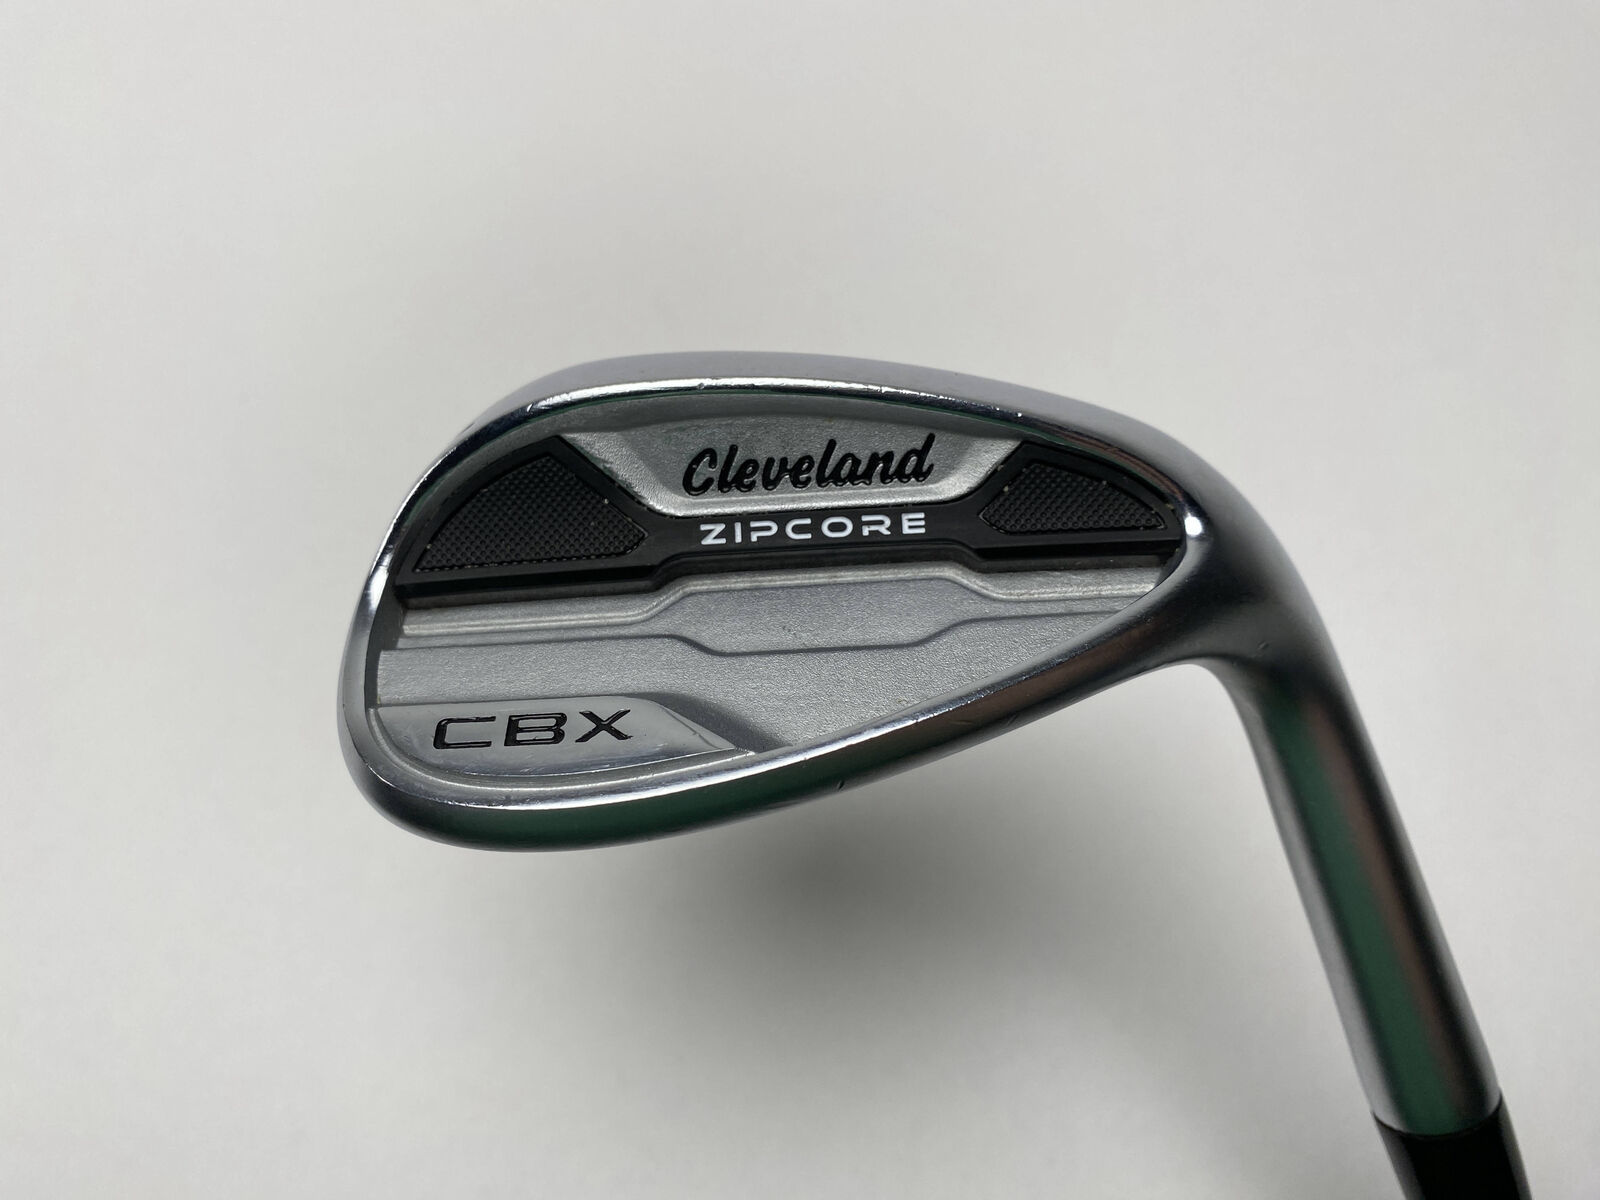 Cleveland CBX Zipcore 54* 12 Project X Catalyst Black Spinner Wedge Graphite RH